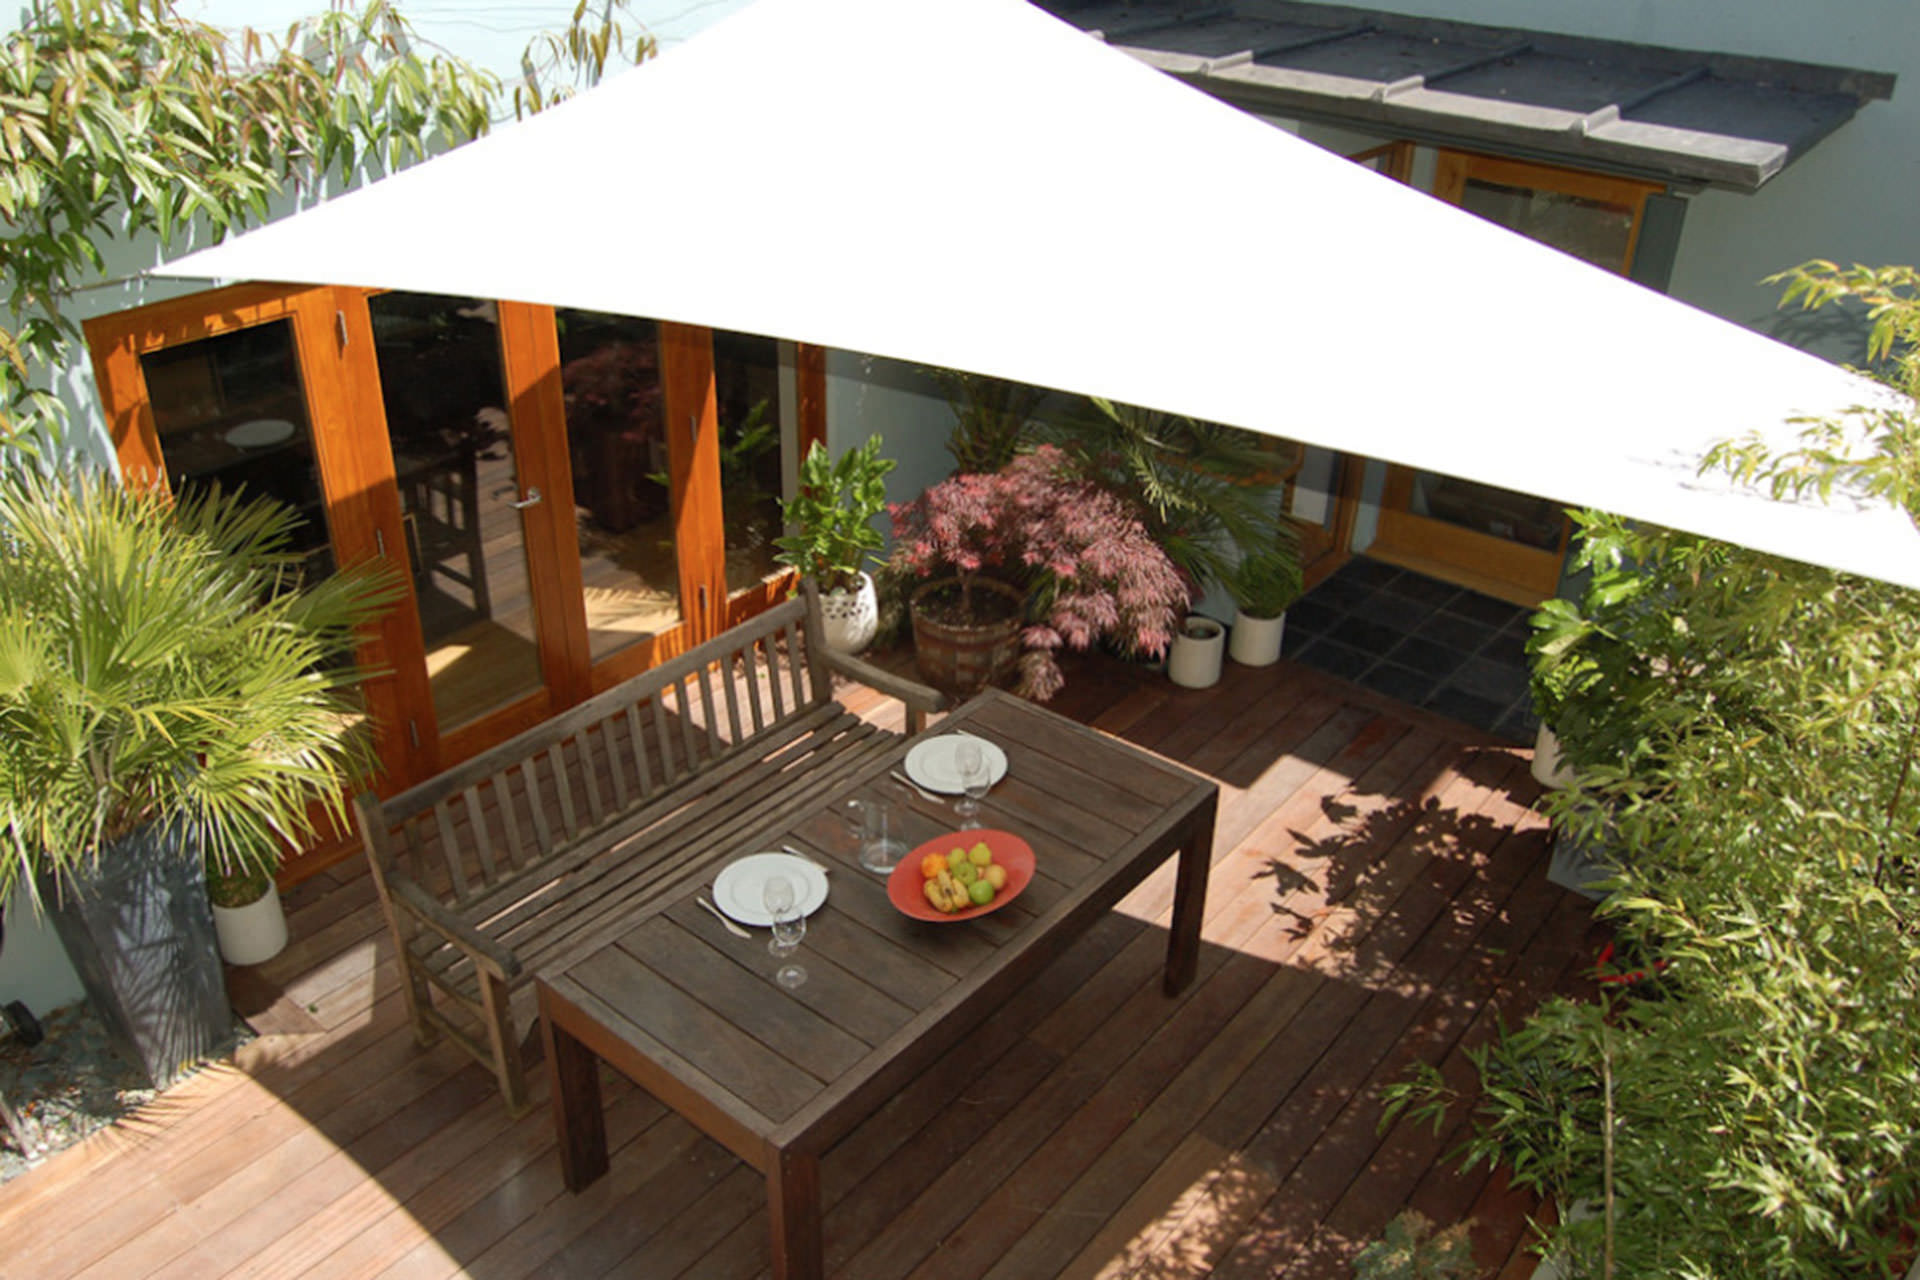 Choosing a Retractable Awning: 'Covering' All The Options